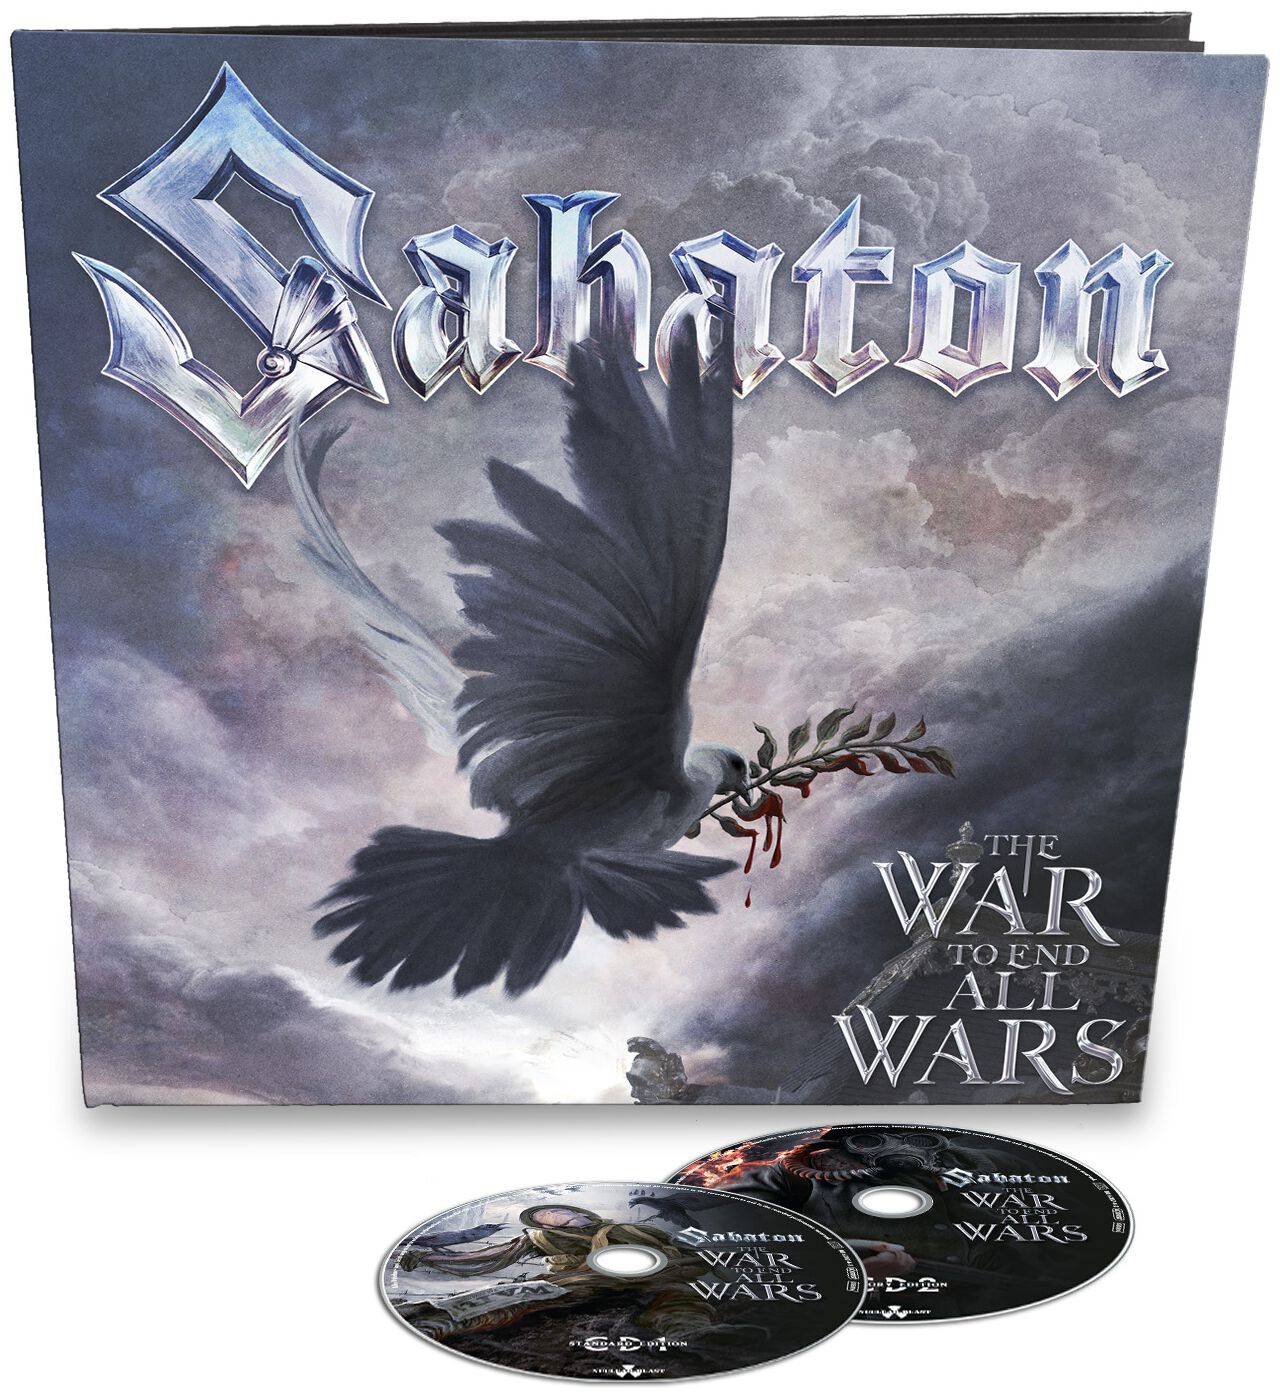 Image of Sabaton The war to end all wars 2-CD Standard